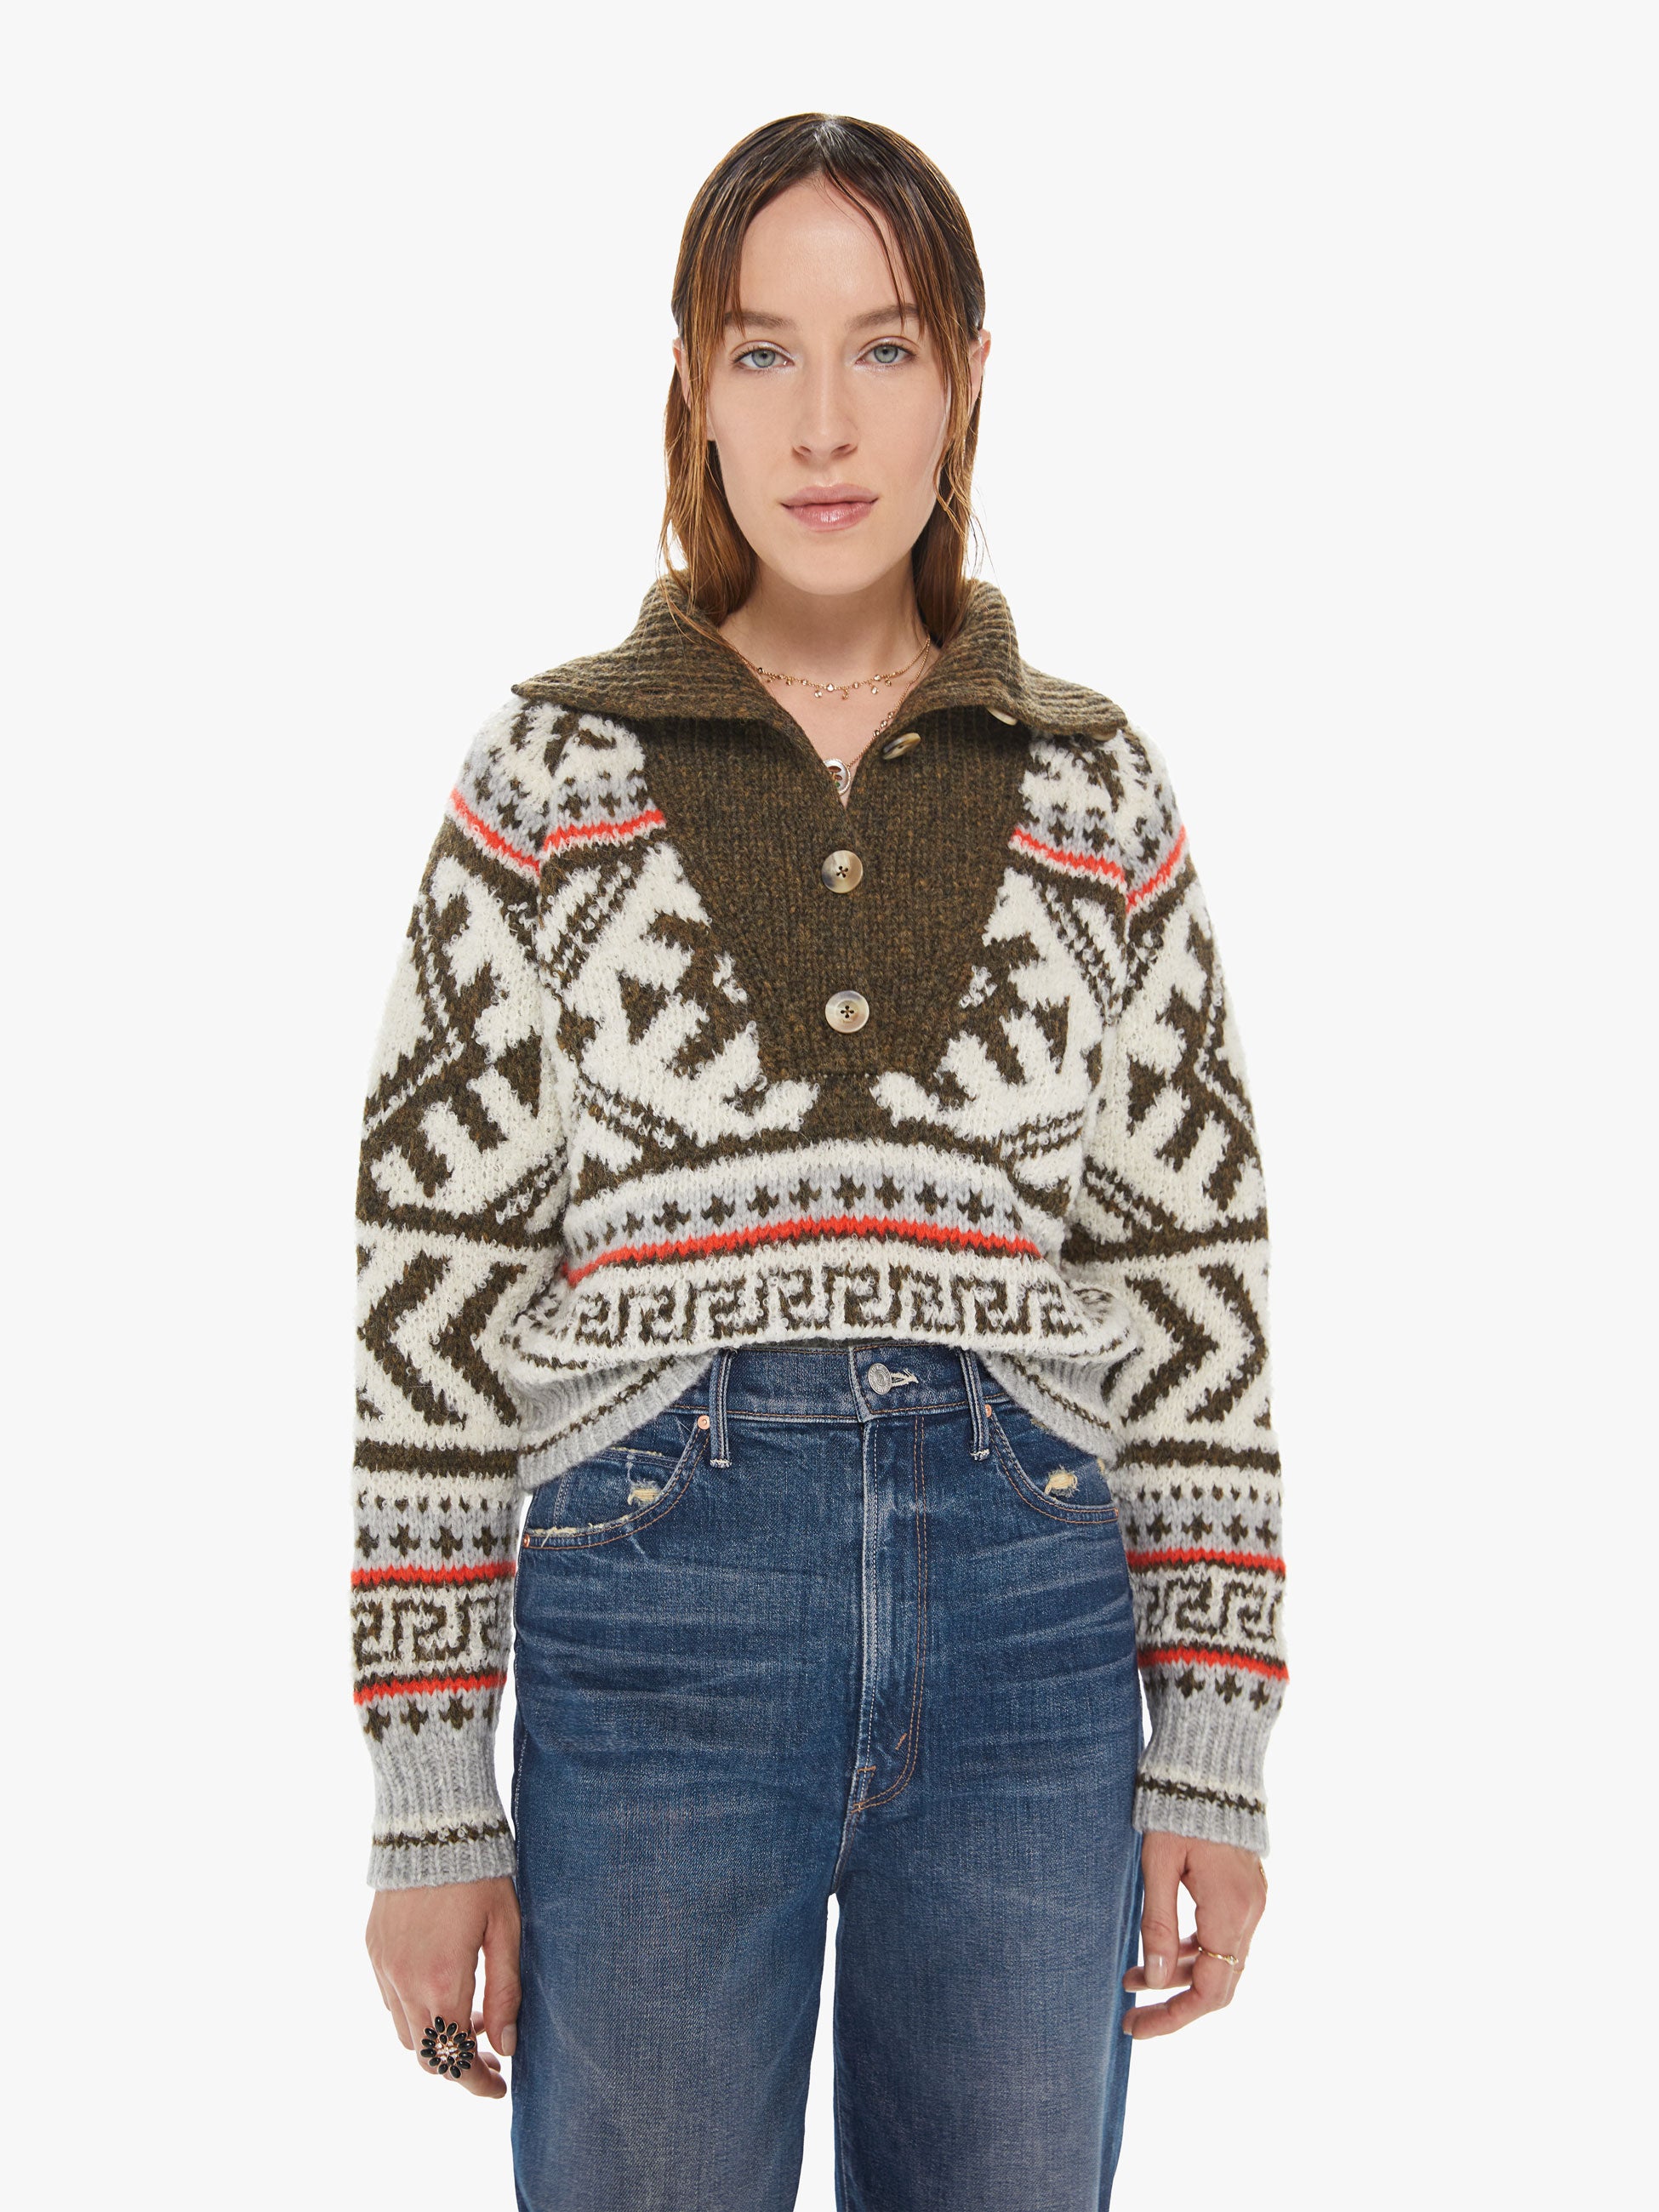 MOTHER THE BUTTONED COLLAR JUMPER DIMESTORE COWGIRL SWEATER